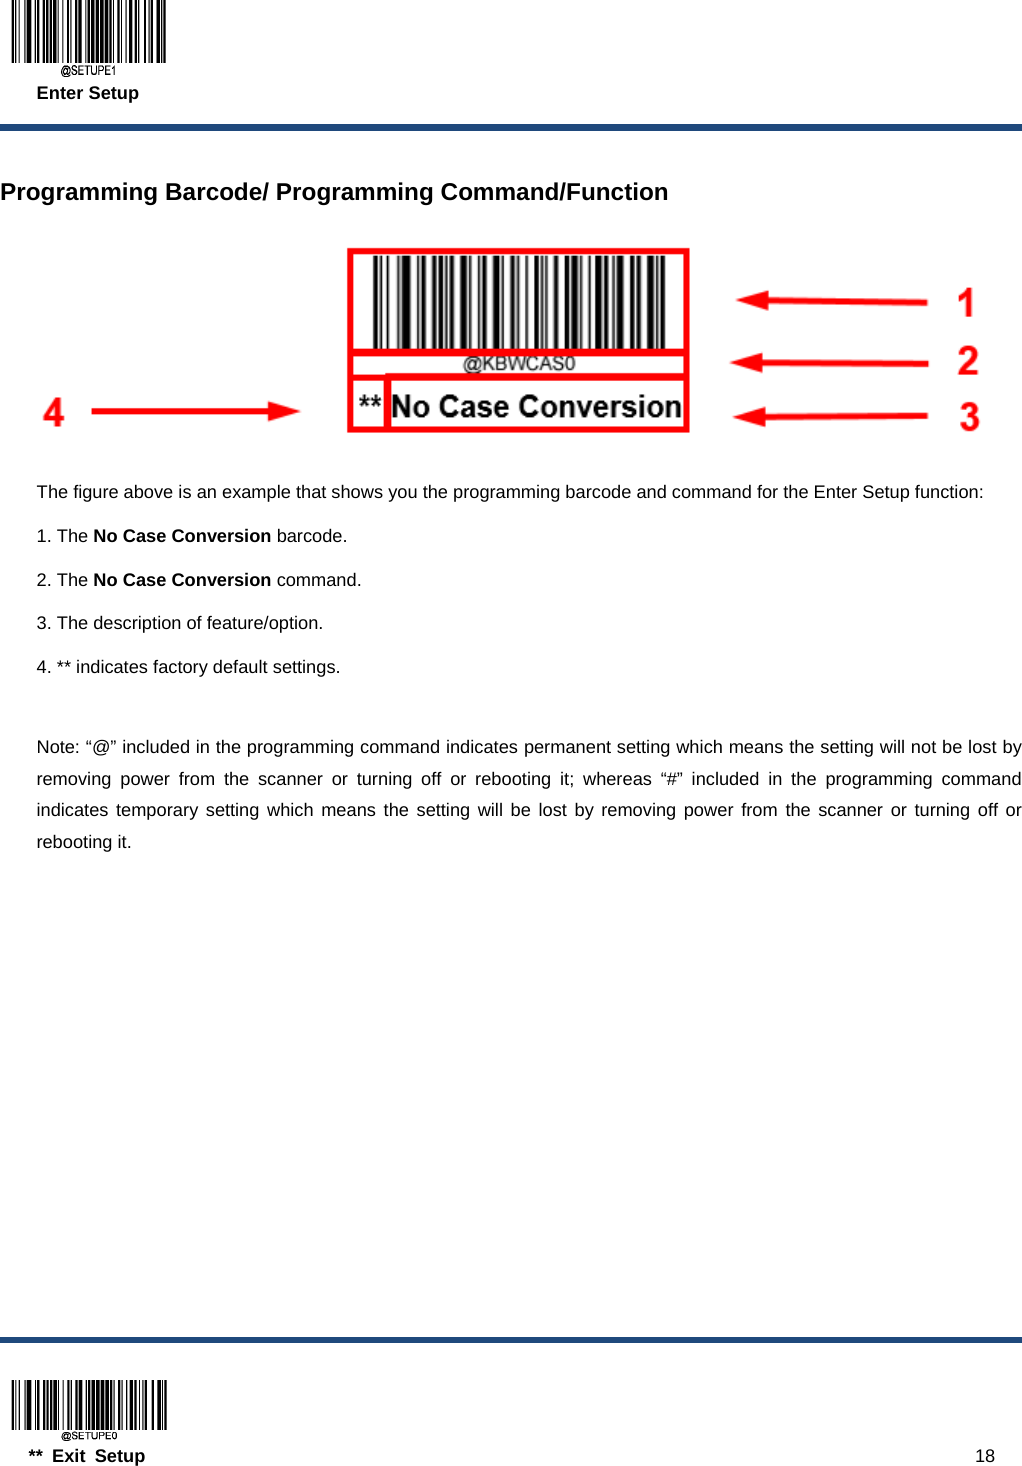  Enter Setup  ** Exit Setup                                                                                           18  Programming Barcode/ Programming Command/Function   The figure above is an example that shows you the programming barcode and command for the Enter Setup function: 1. The No Case Conversion barcode. 2. The No Case Conversion command. 3. The description of feature/option. 4. ** indicates factory default settings.  Note: “@” included in the programming command indicates permanent setting which means the setting will not be lost by removing power from the scanner or turning off or rebooting it; whereas “#” included in the programming command indicates temporary setting which means the setting will be lost by removing power from the scanner or turning off or rebooting it. 